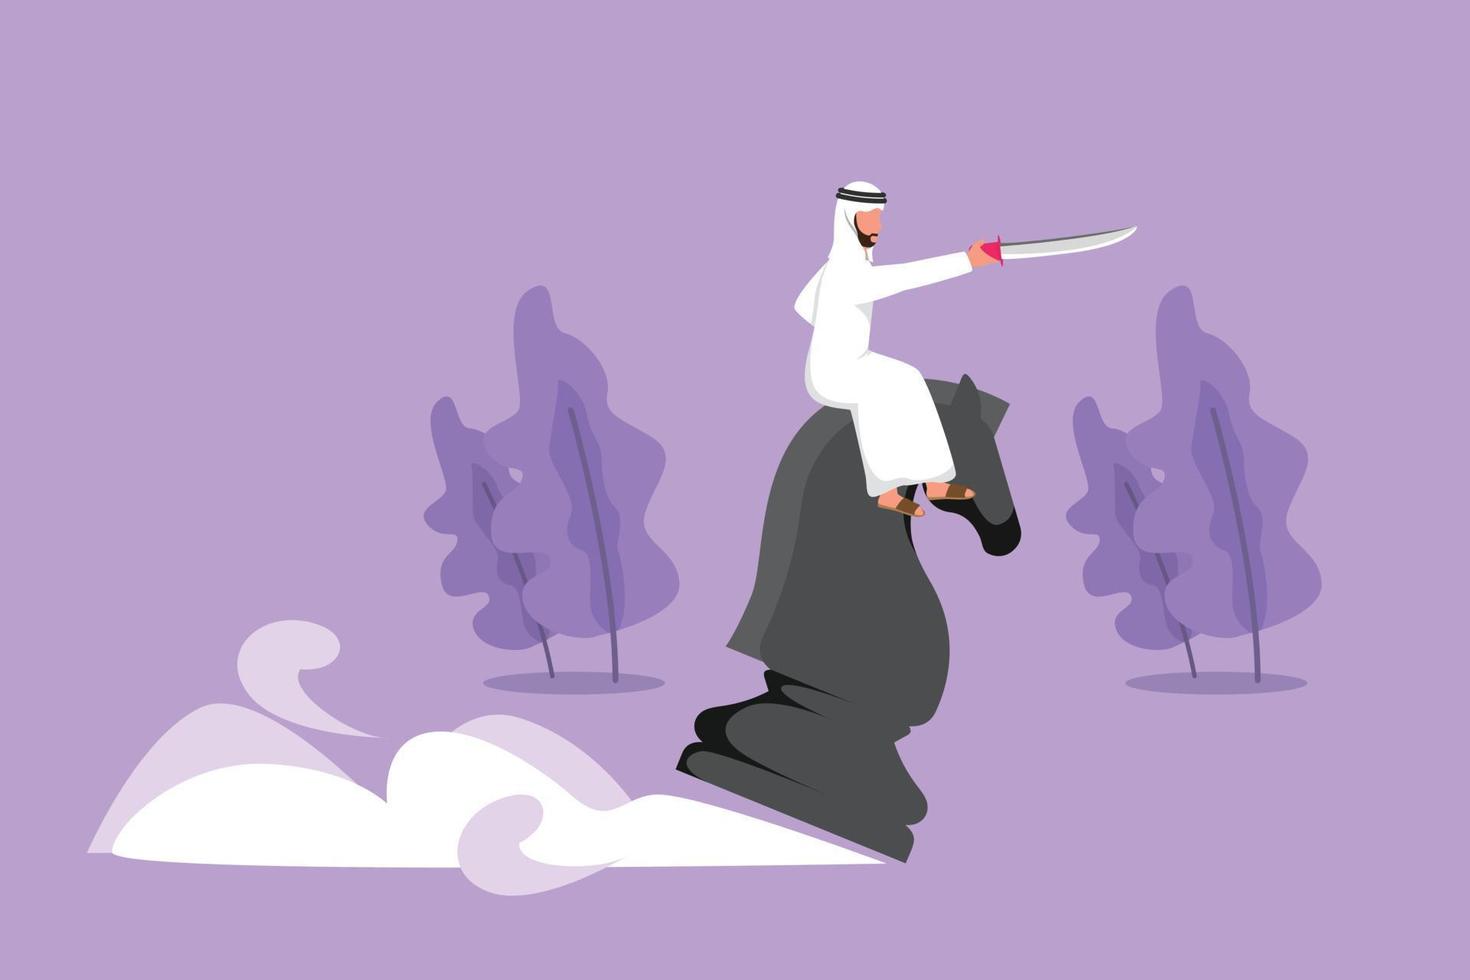 Character flat drawing competitive Arab businessman riding big chess horse knight with sword. Idea, business strategy, winning competition, achievement goal concept. Cartoon design vector illustration